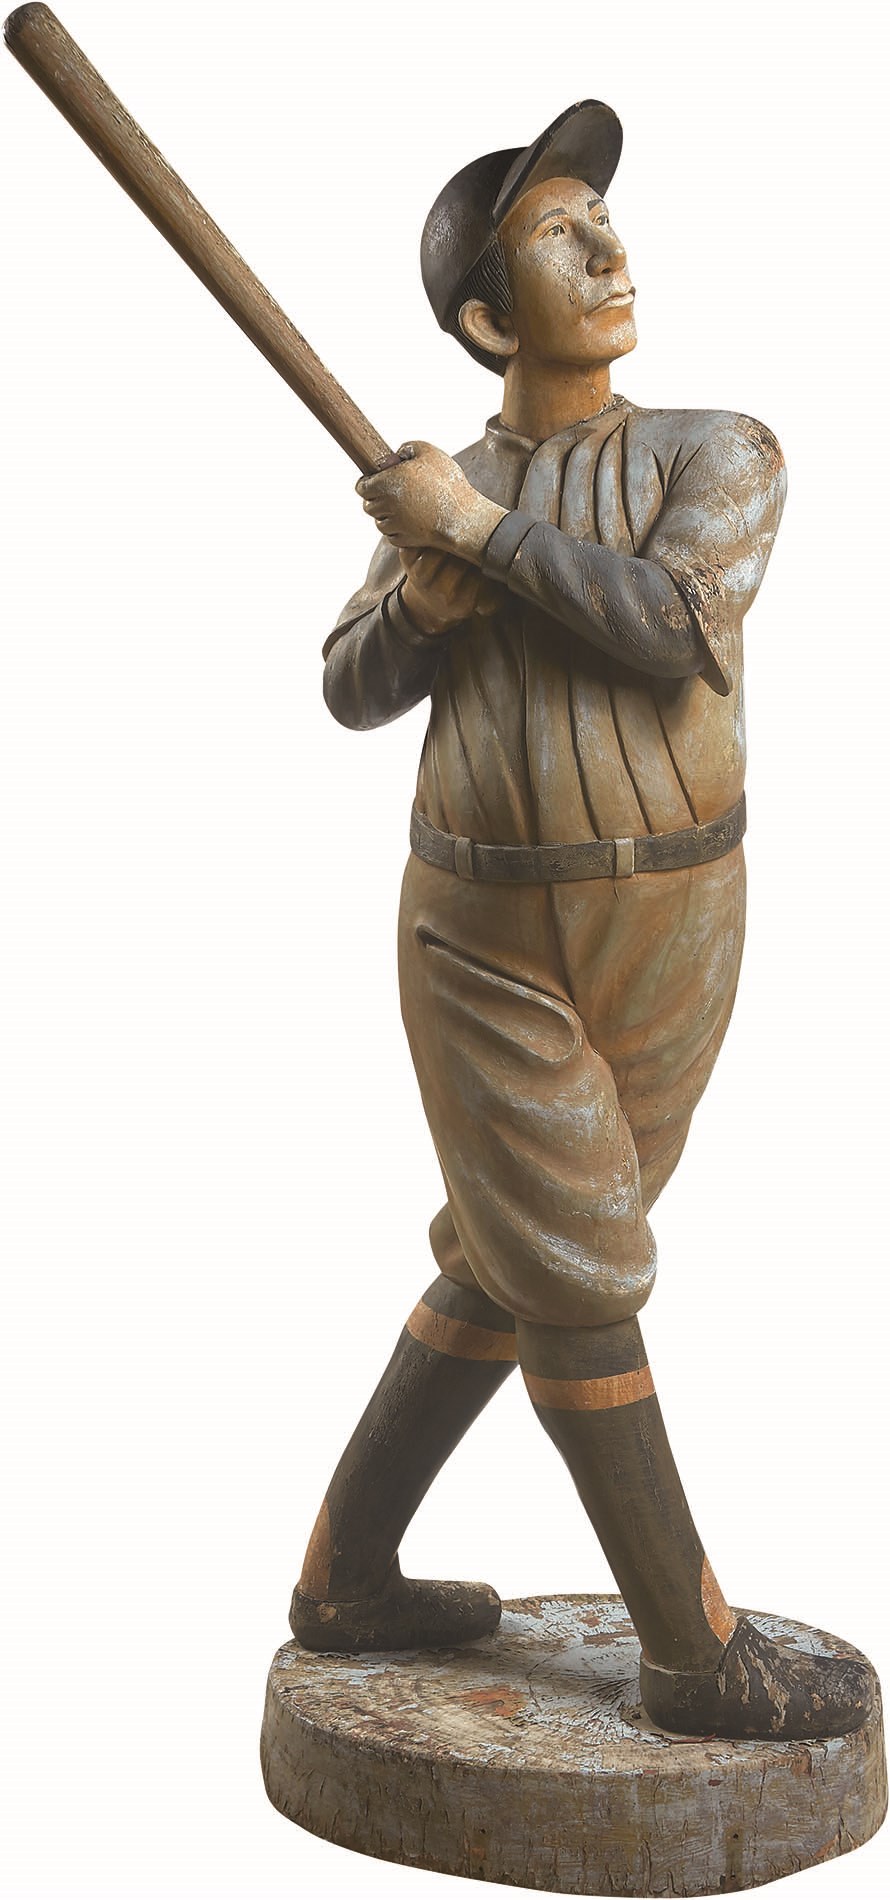 - Important 1950s Ted Williams Folk Art Trade Figure (Life Size)